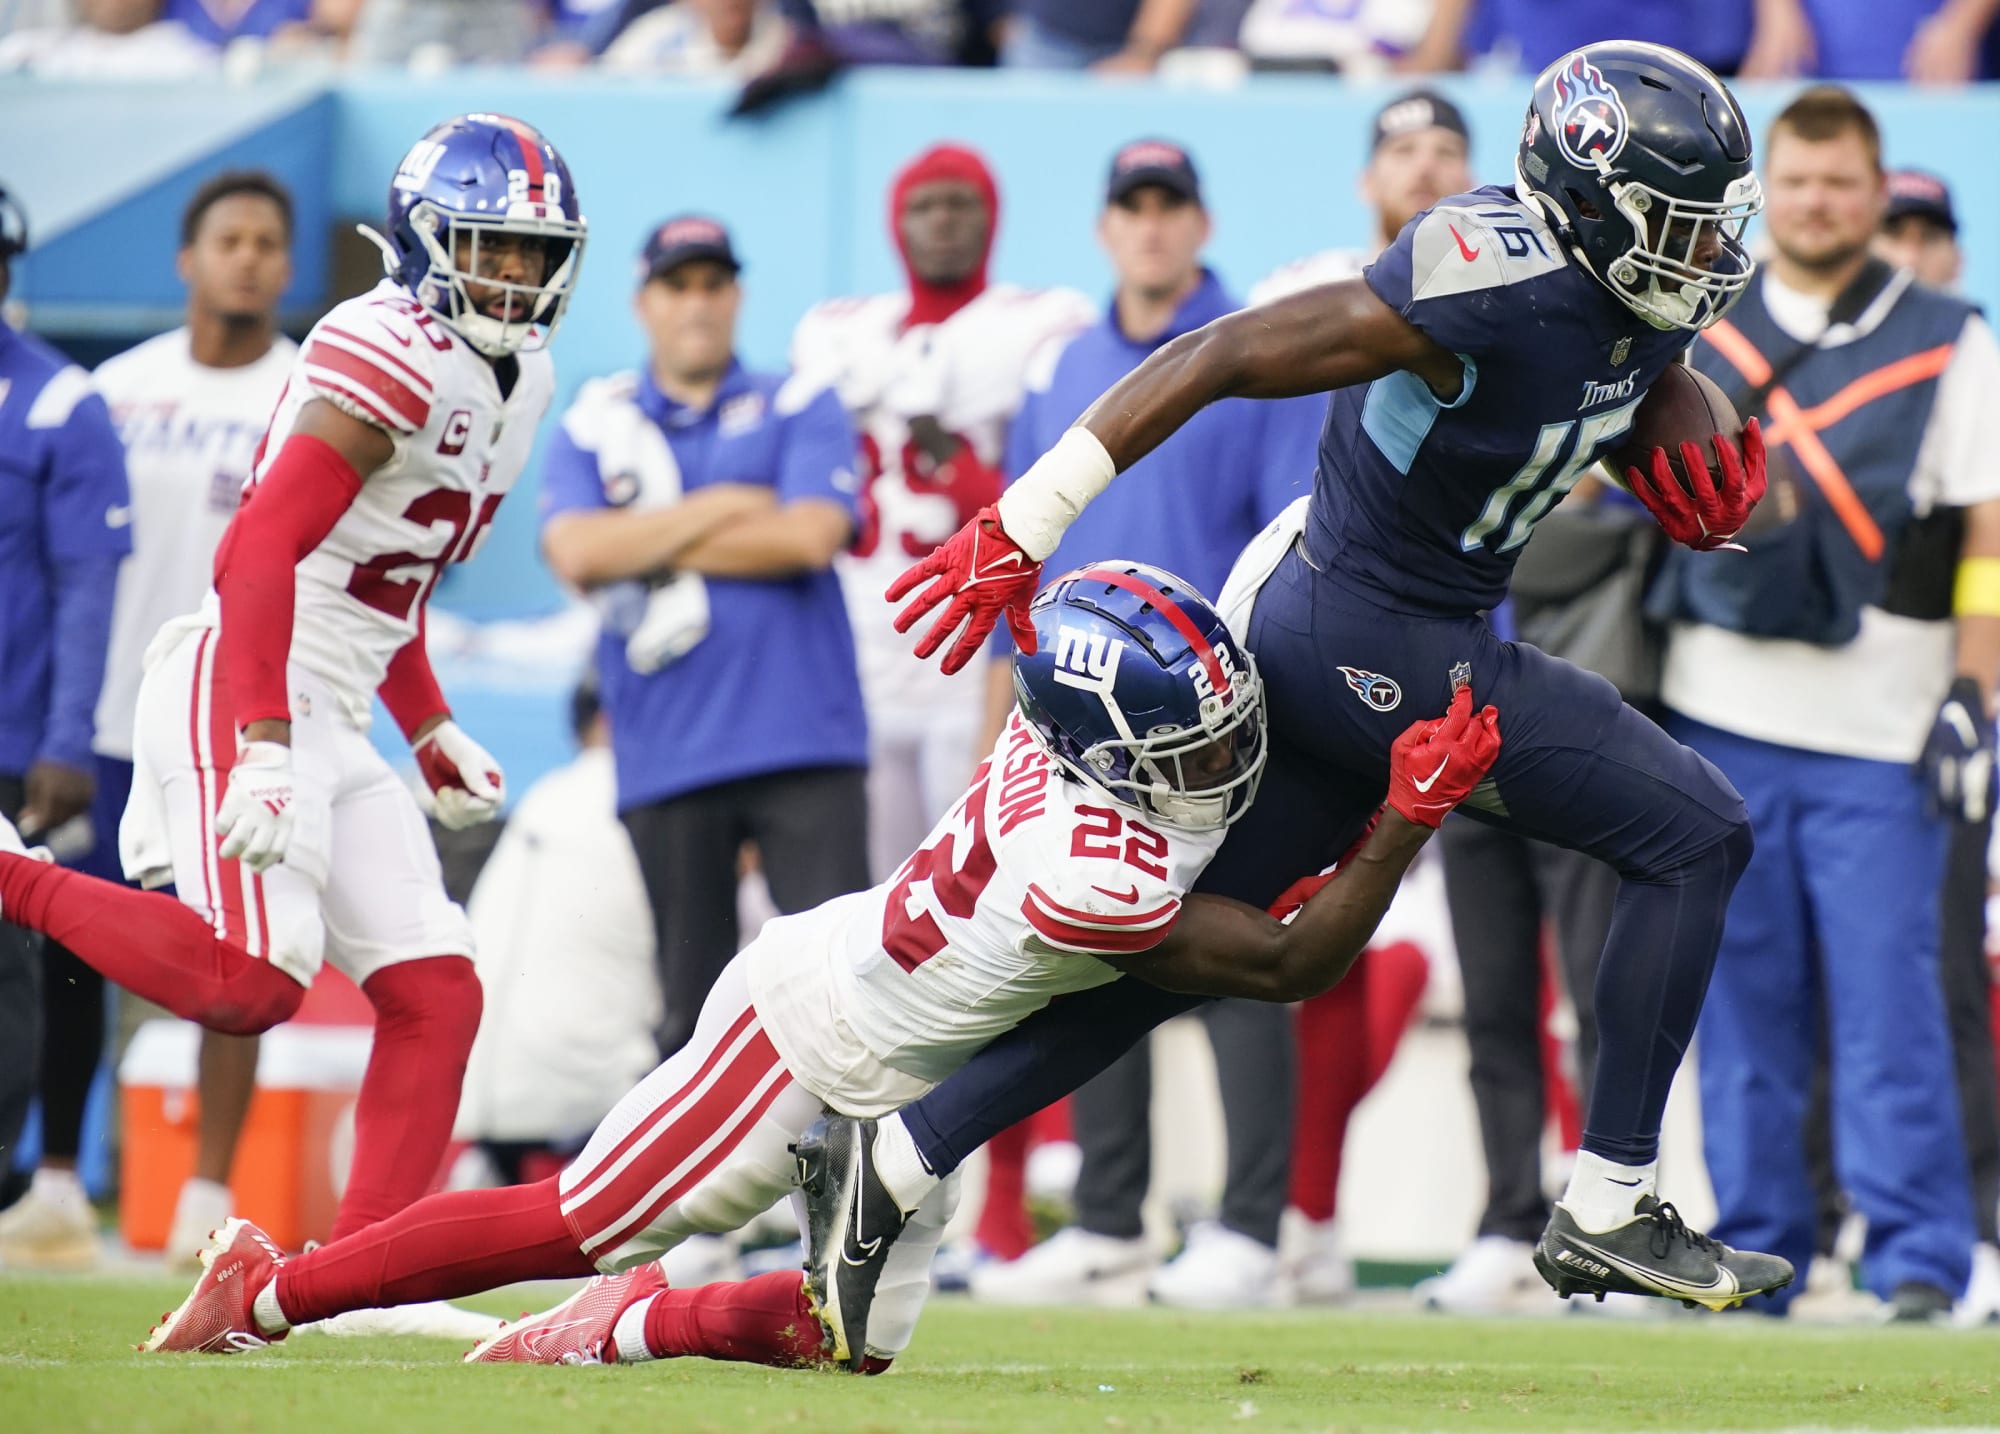 One positive change in the Tennessee Titans offense